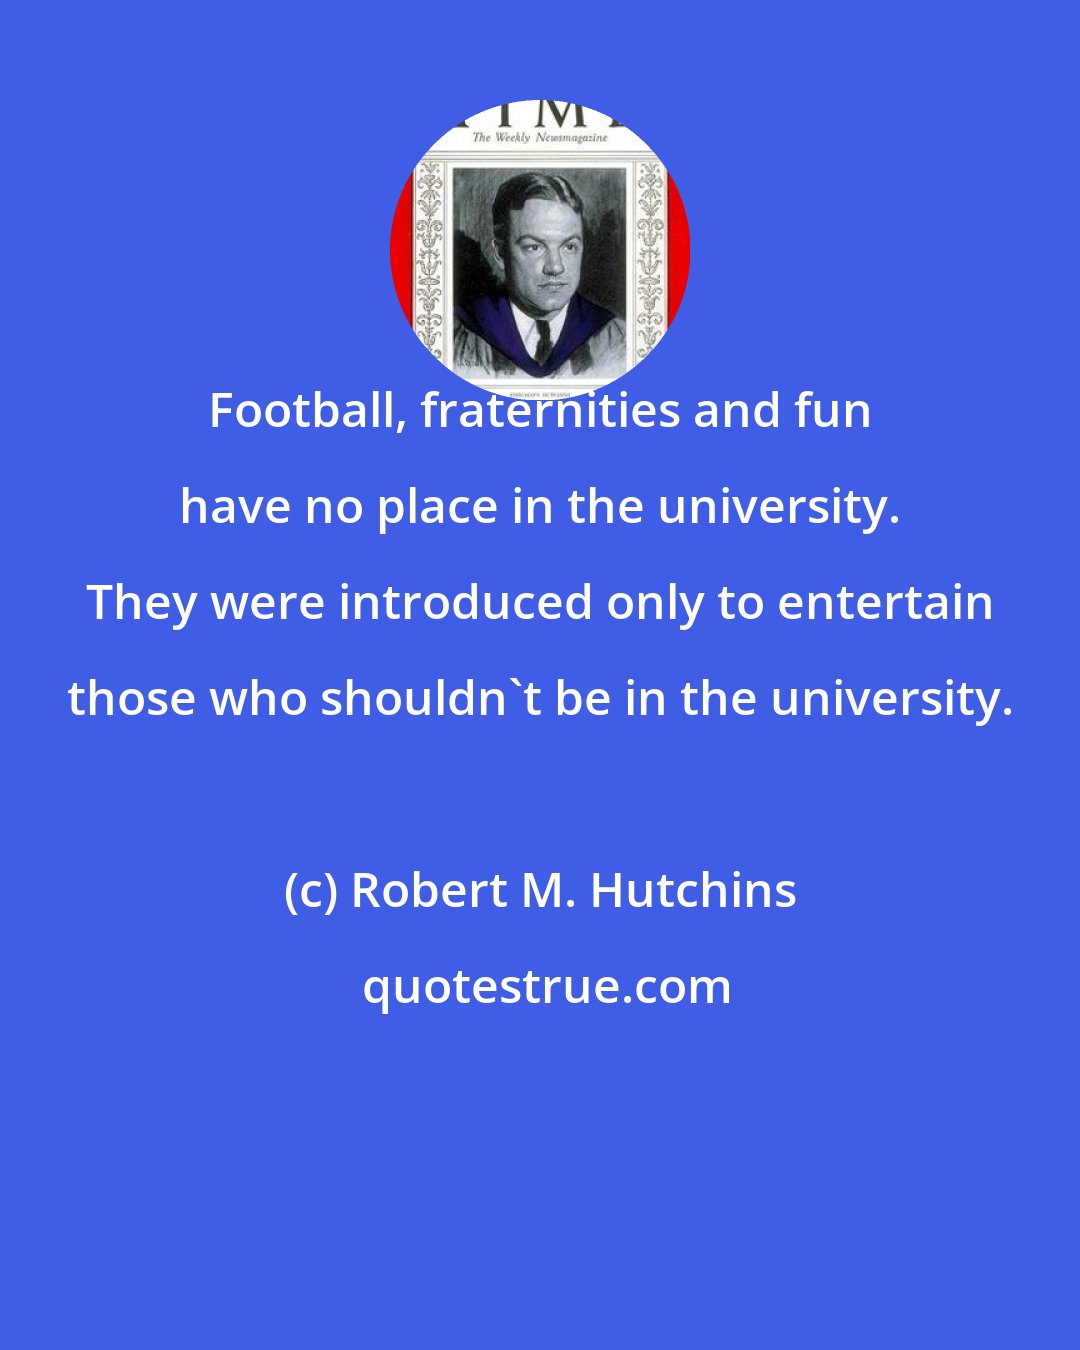 Robert M. Hutchins: Football, fraternities and fun have no place in the university. They were introduced only to entertain those who shouldn't be in the university.